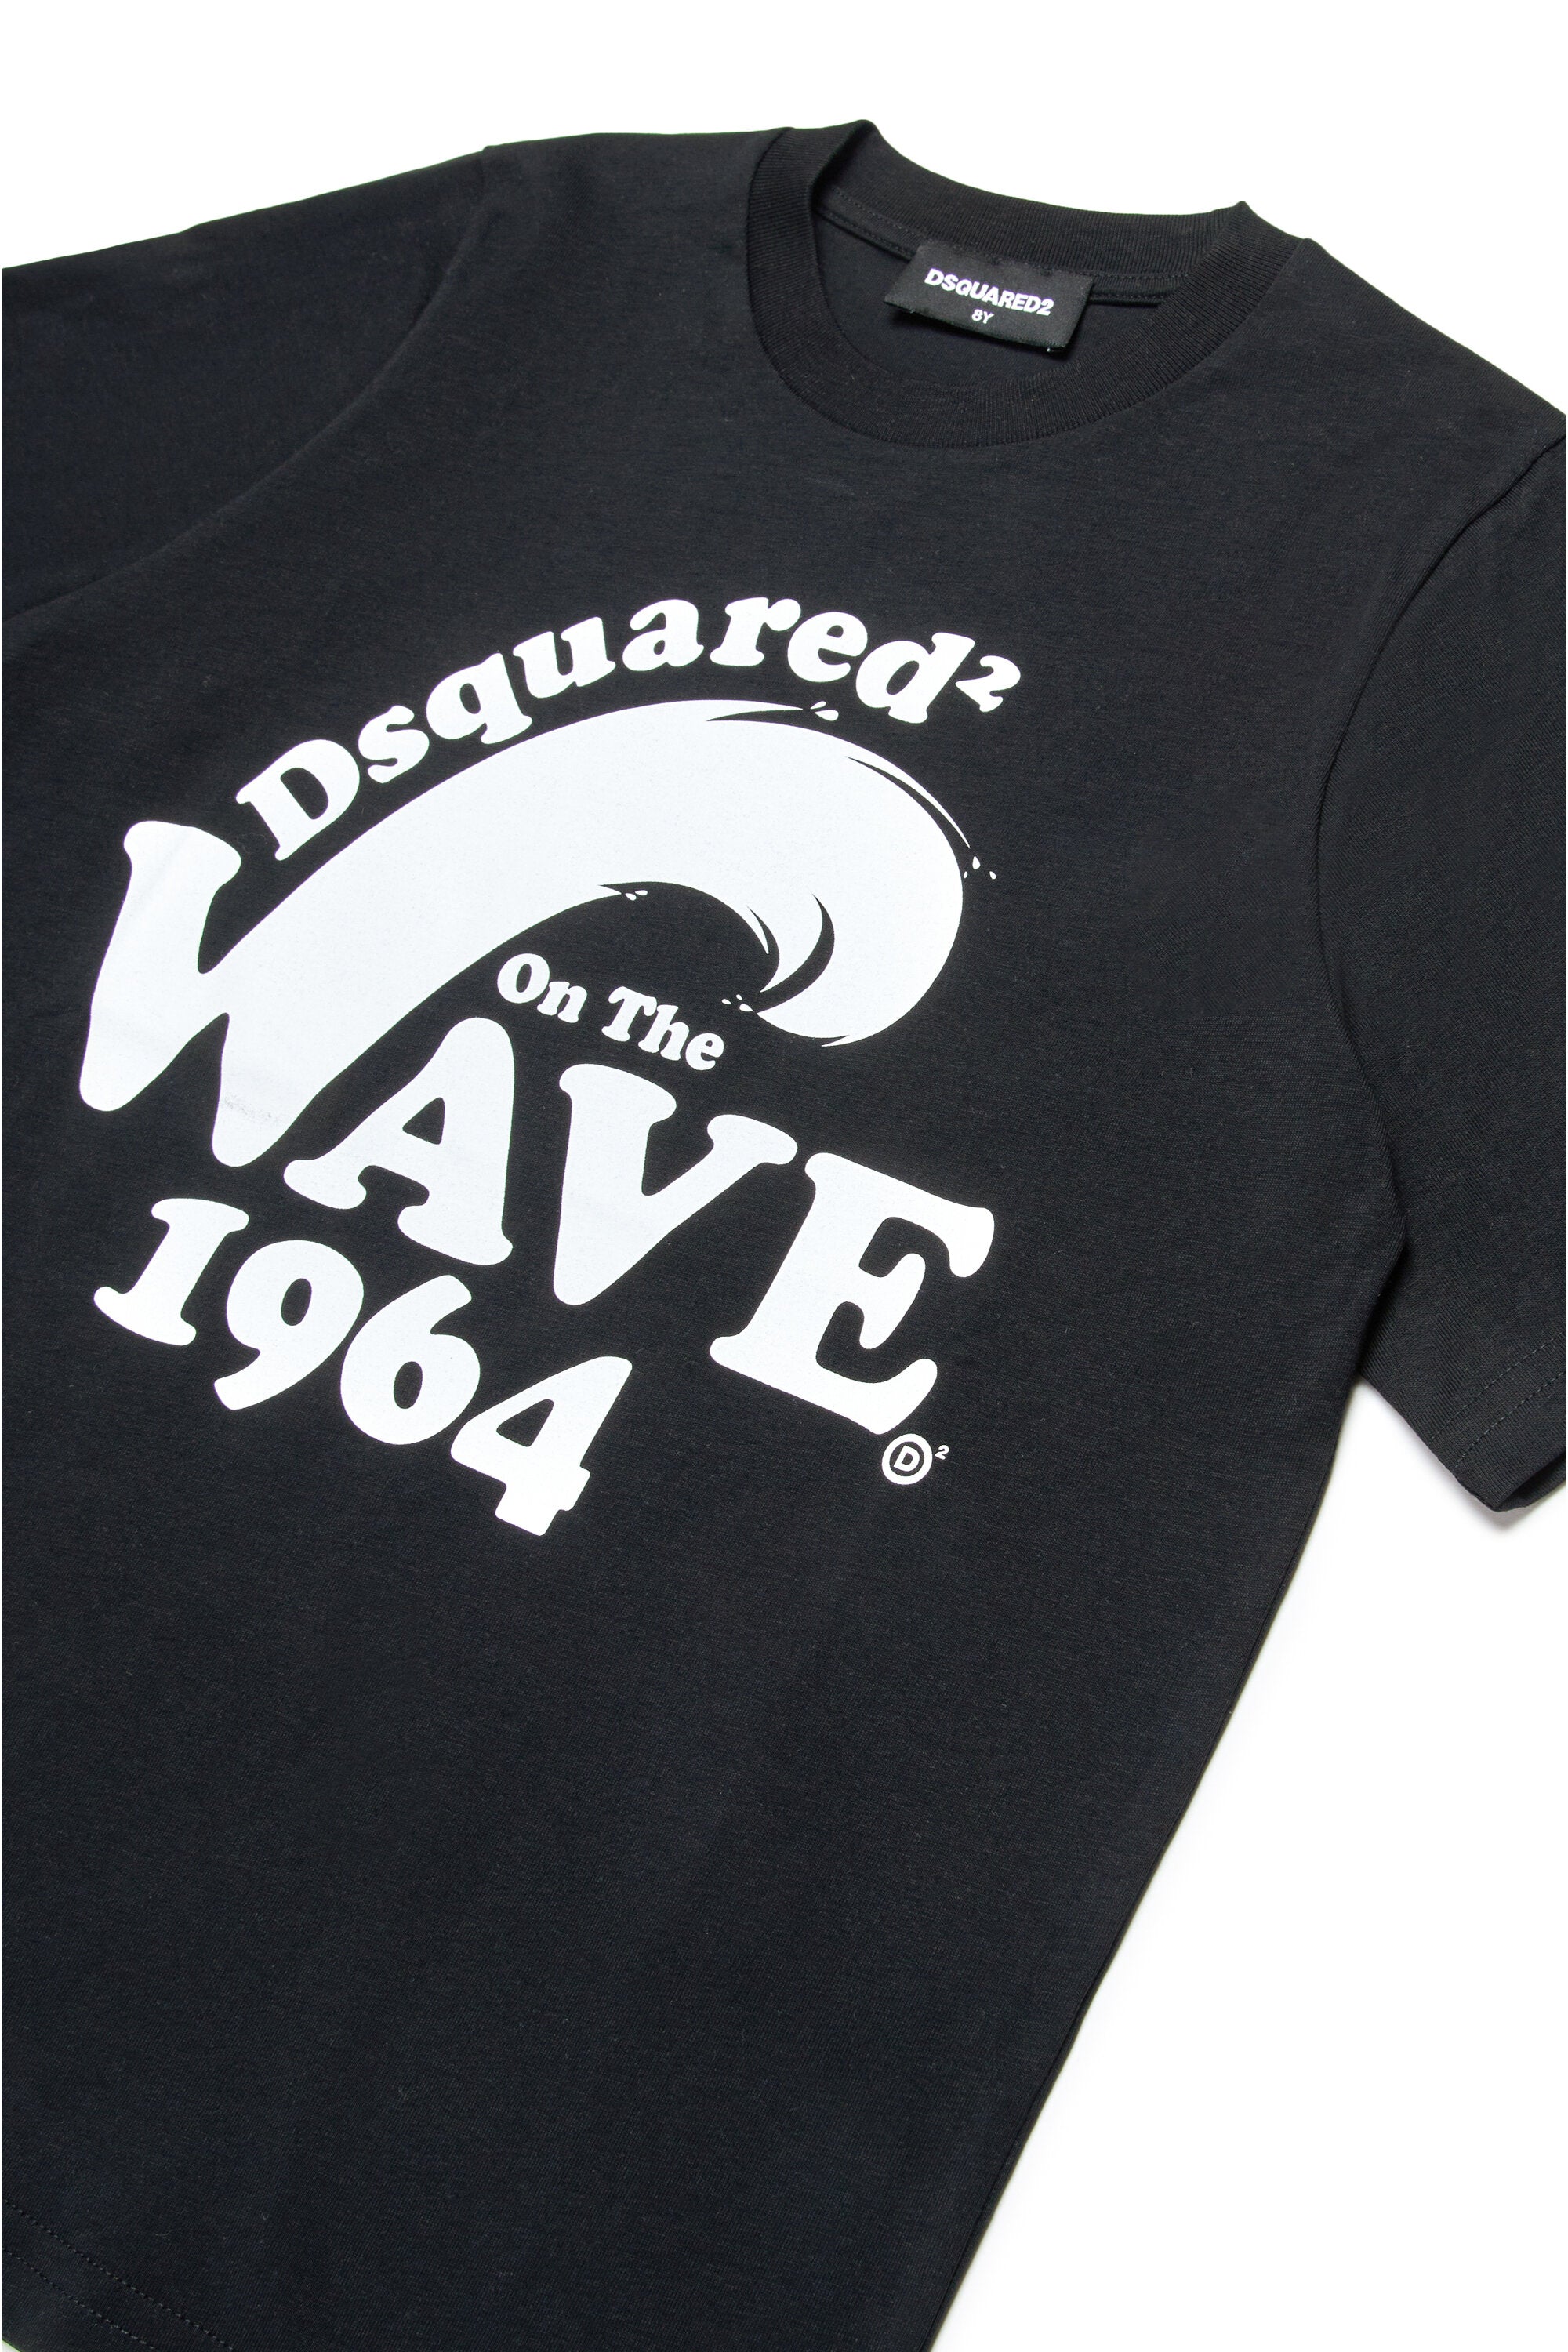 T-shirt with Wave 1964 graphics